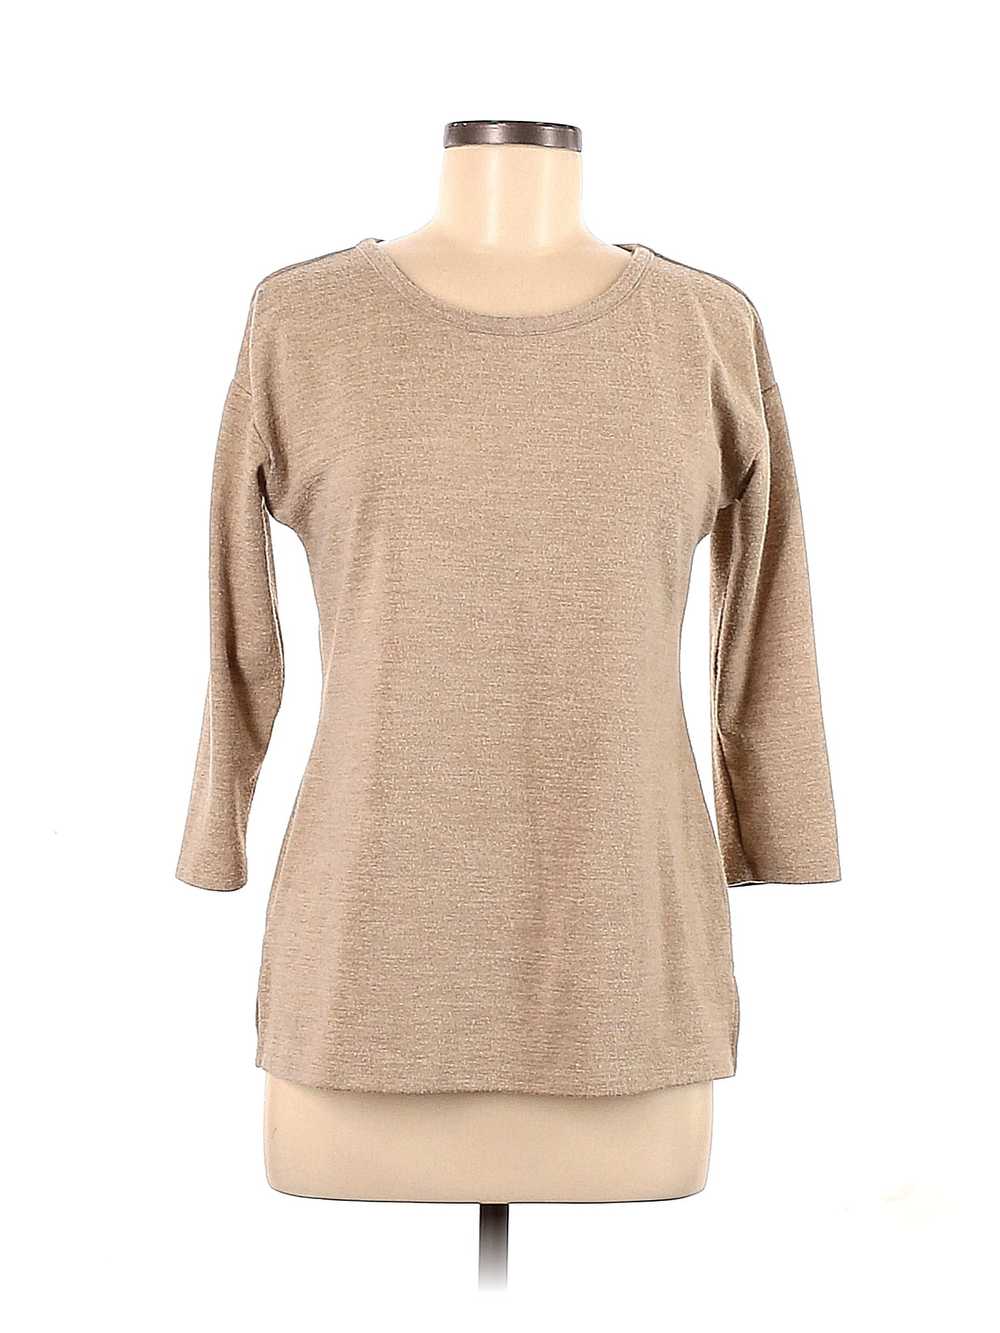 Talbots Women Brown Pullover Sweater S Petites - image 1